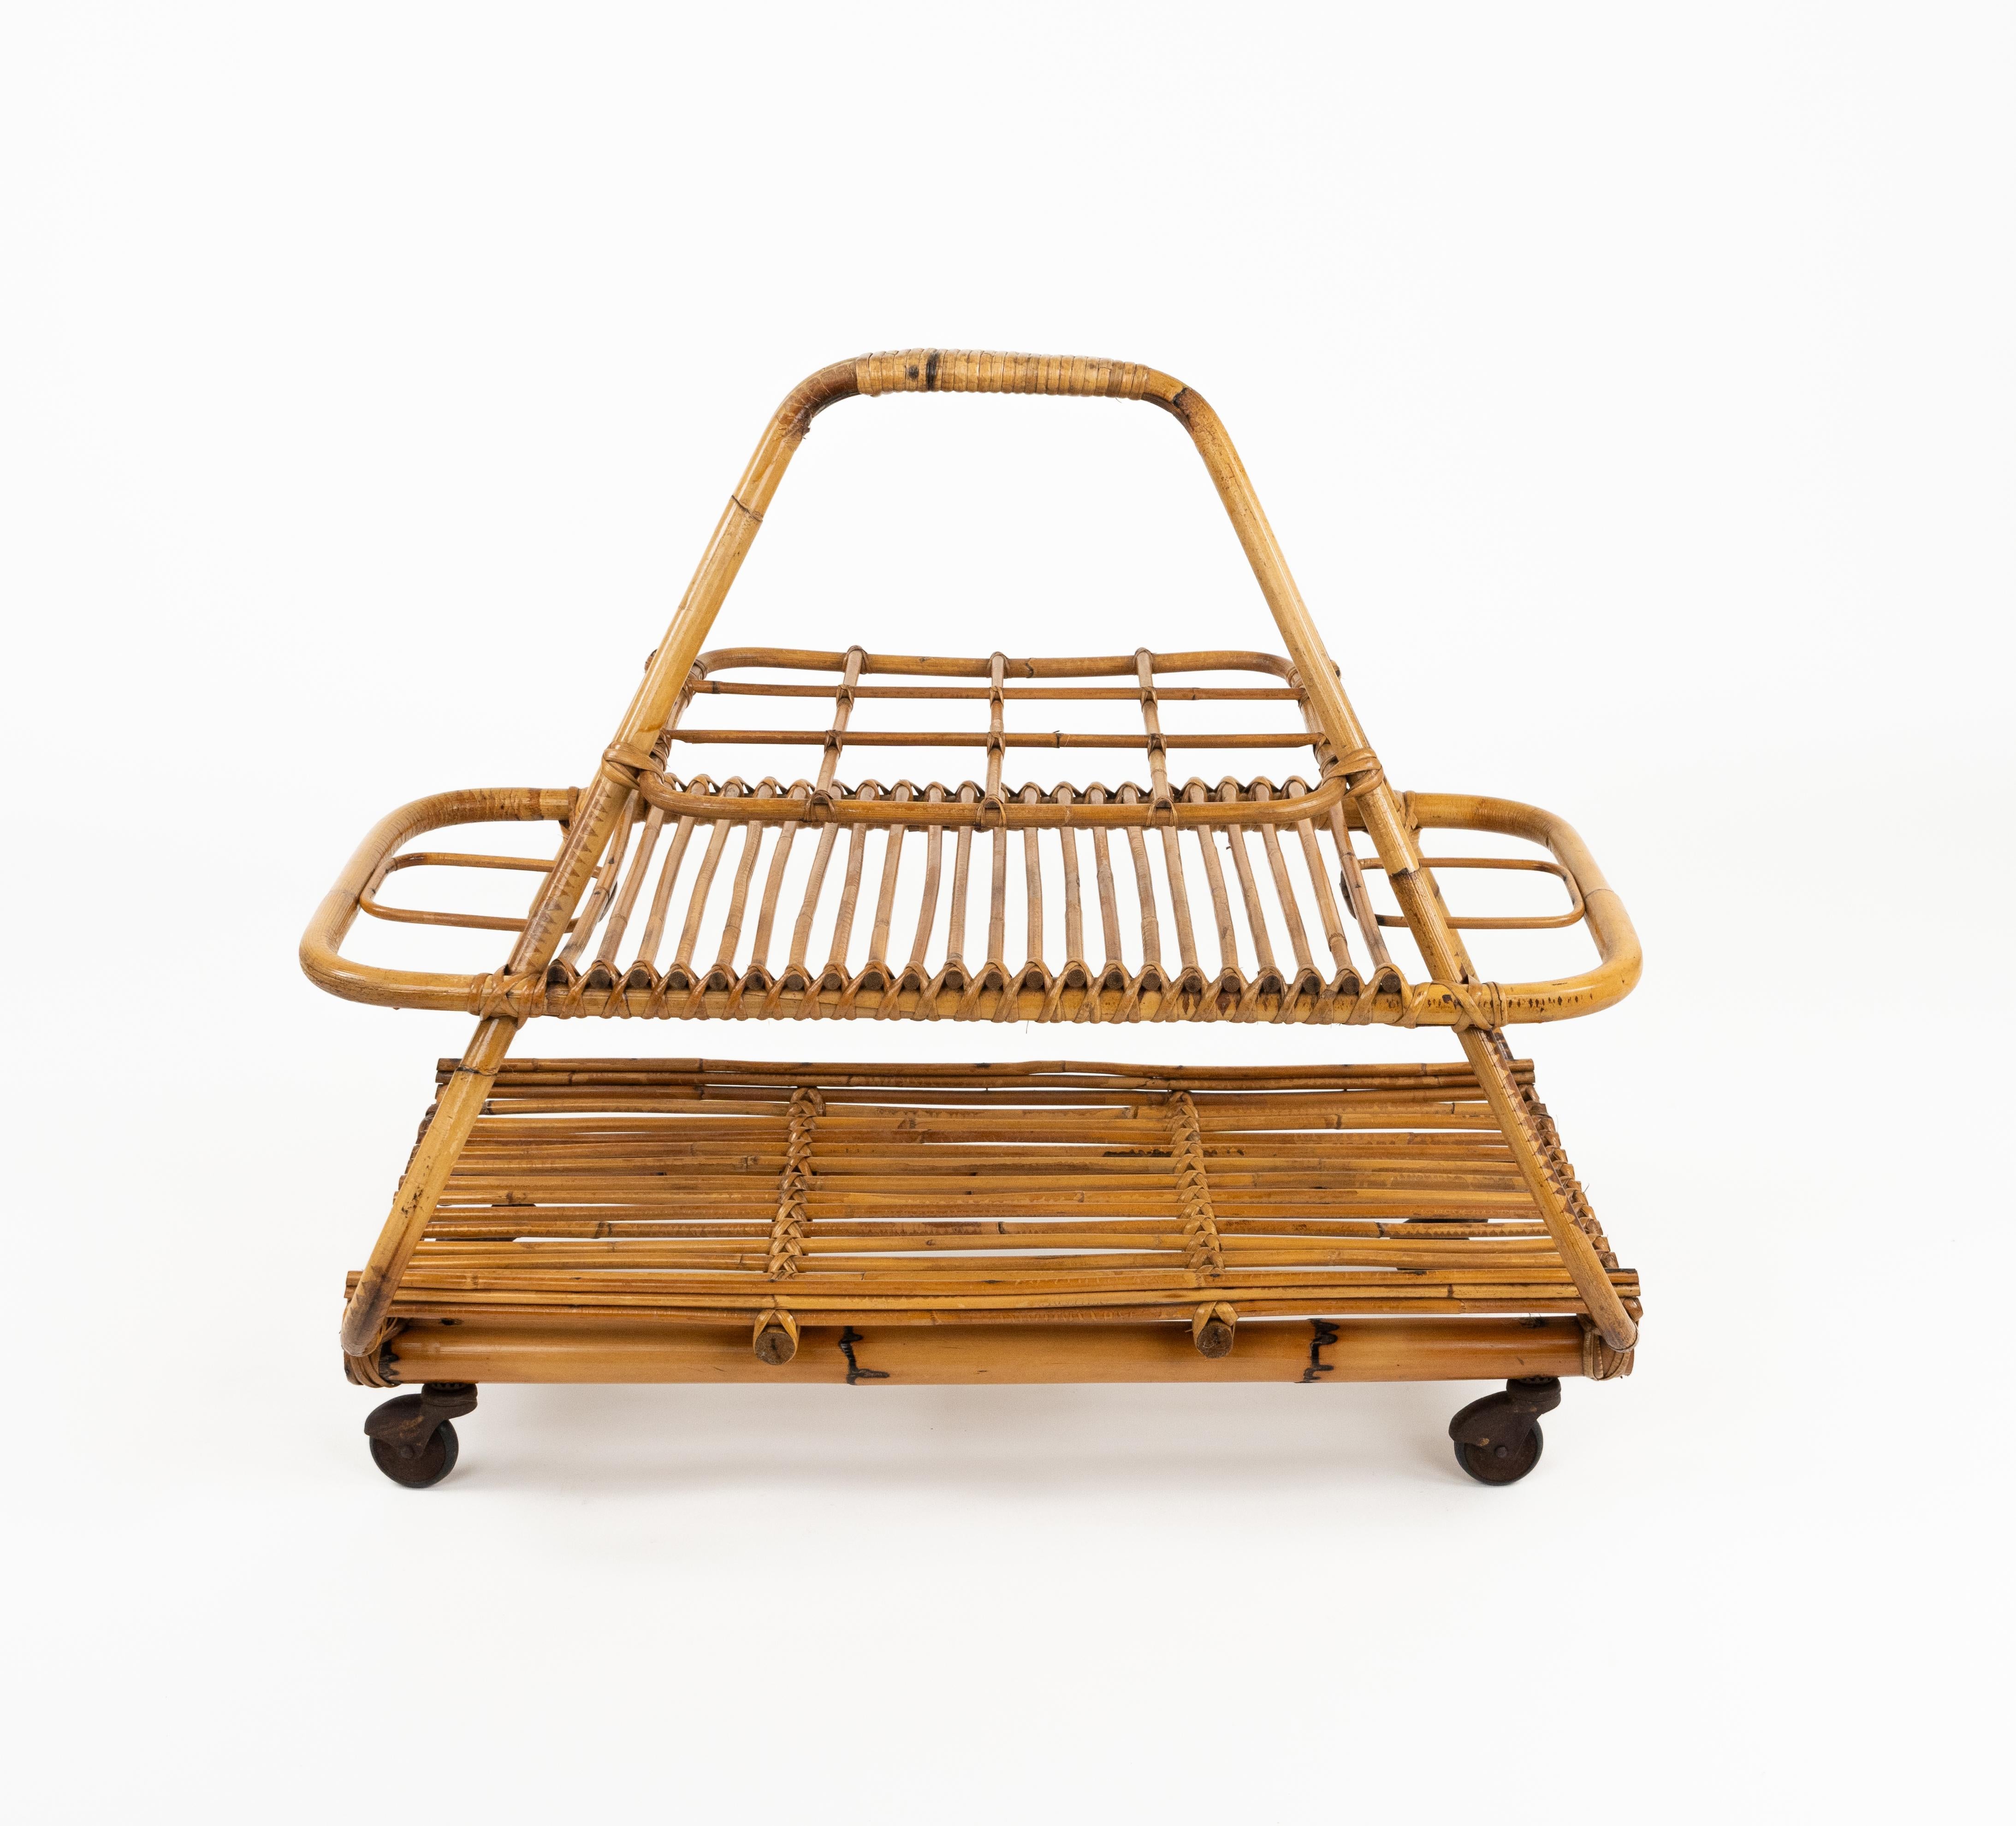 Midcentury Serving Bar Cart with bottle holder in Rattan and Bamboo, Italy 1960s For Sale 2